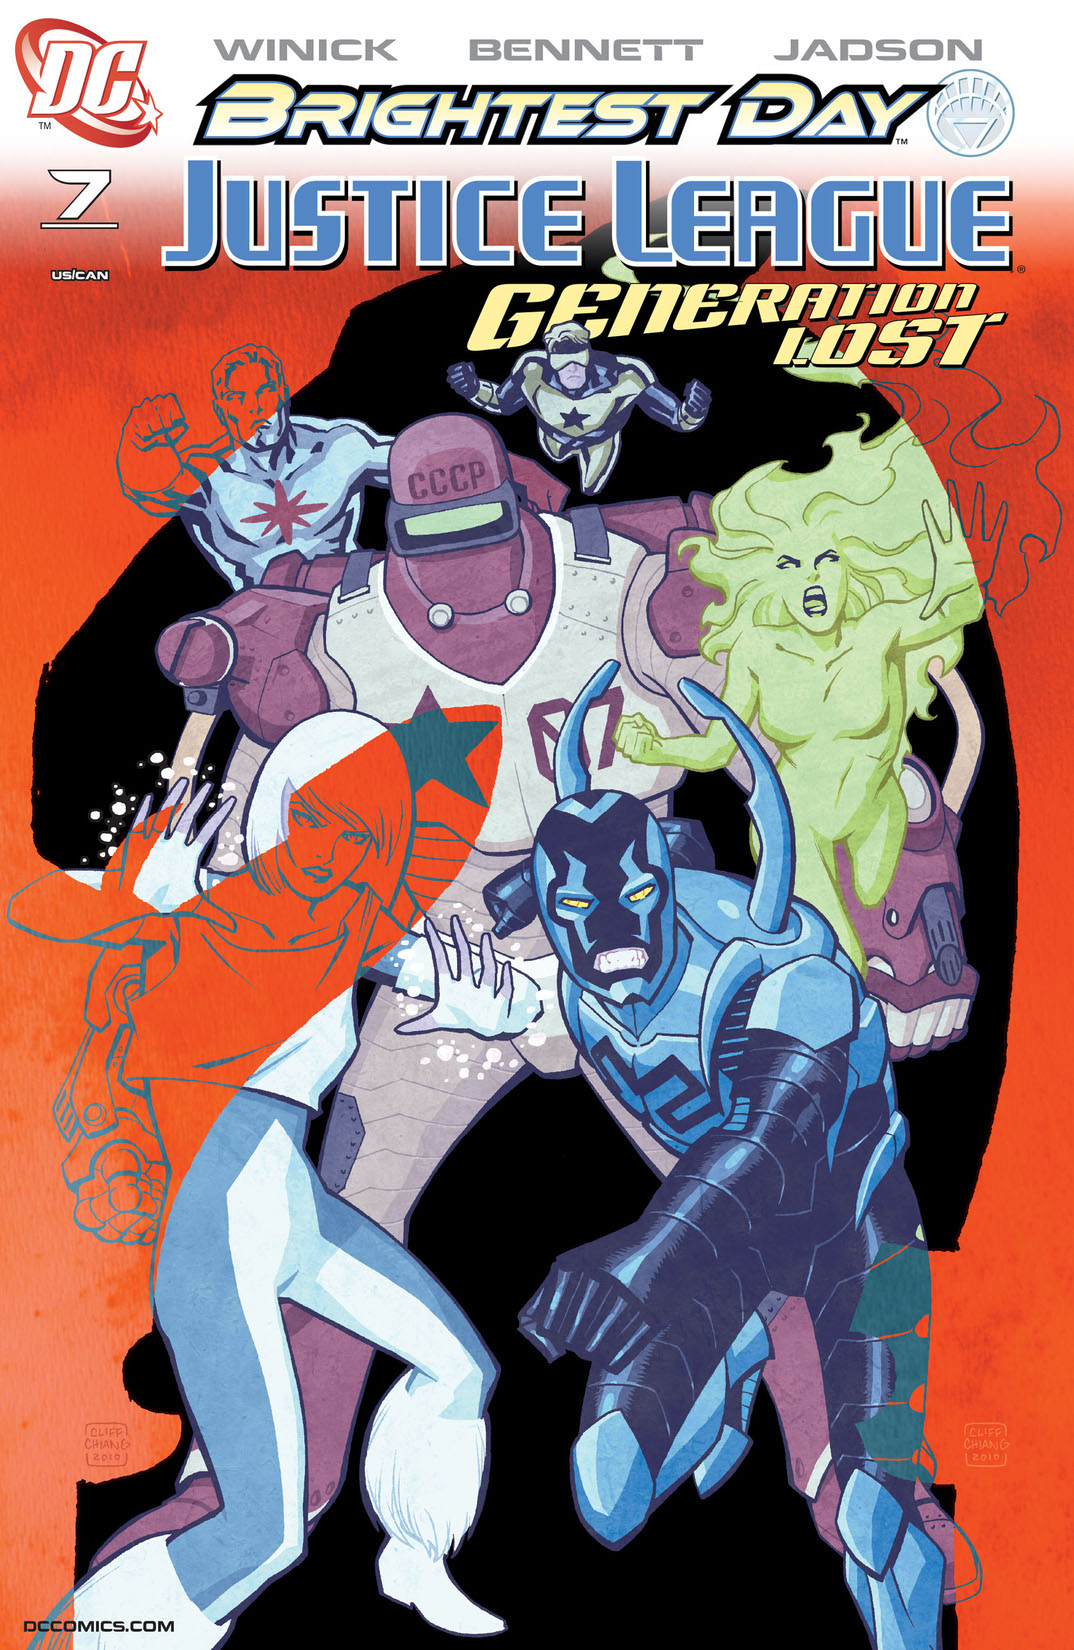 Justice League: Generation Lost #7 preview images